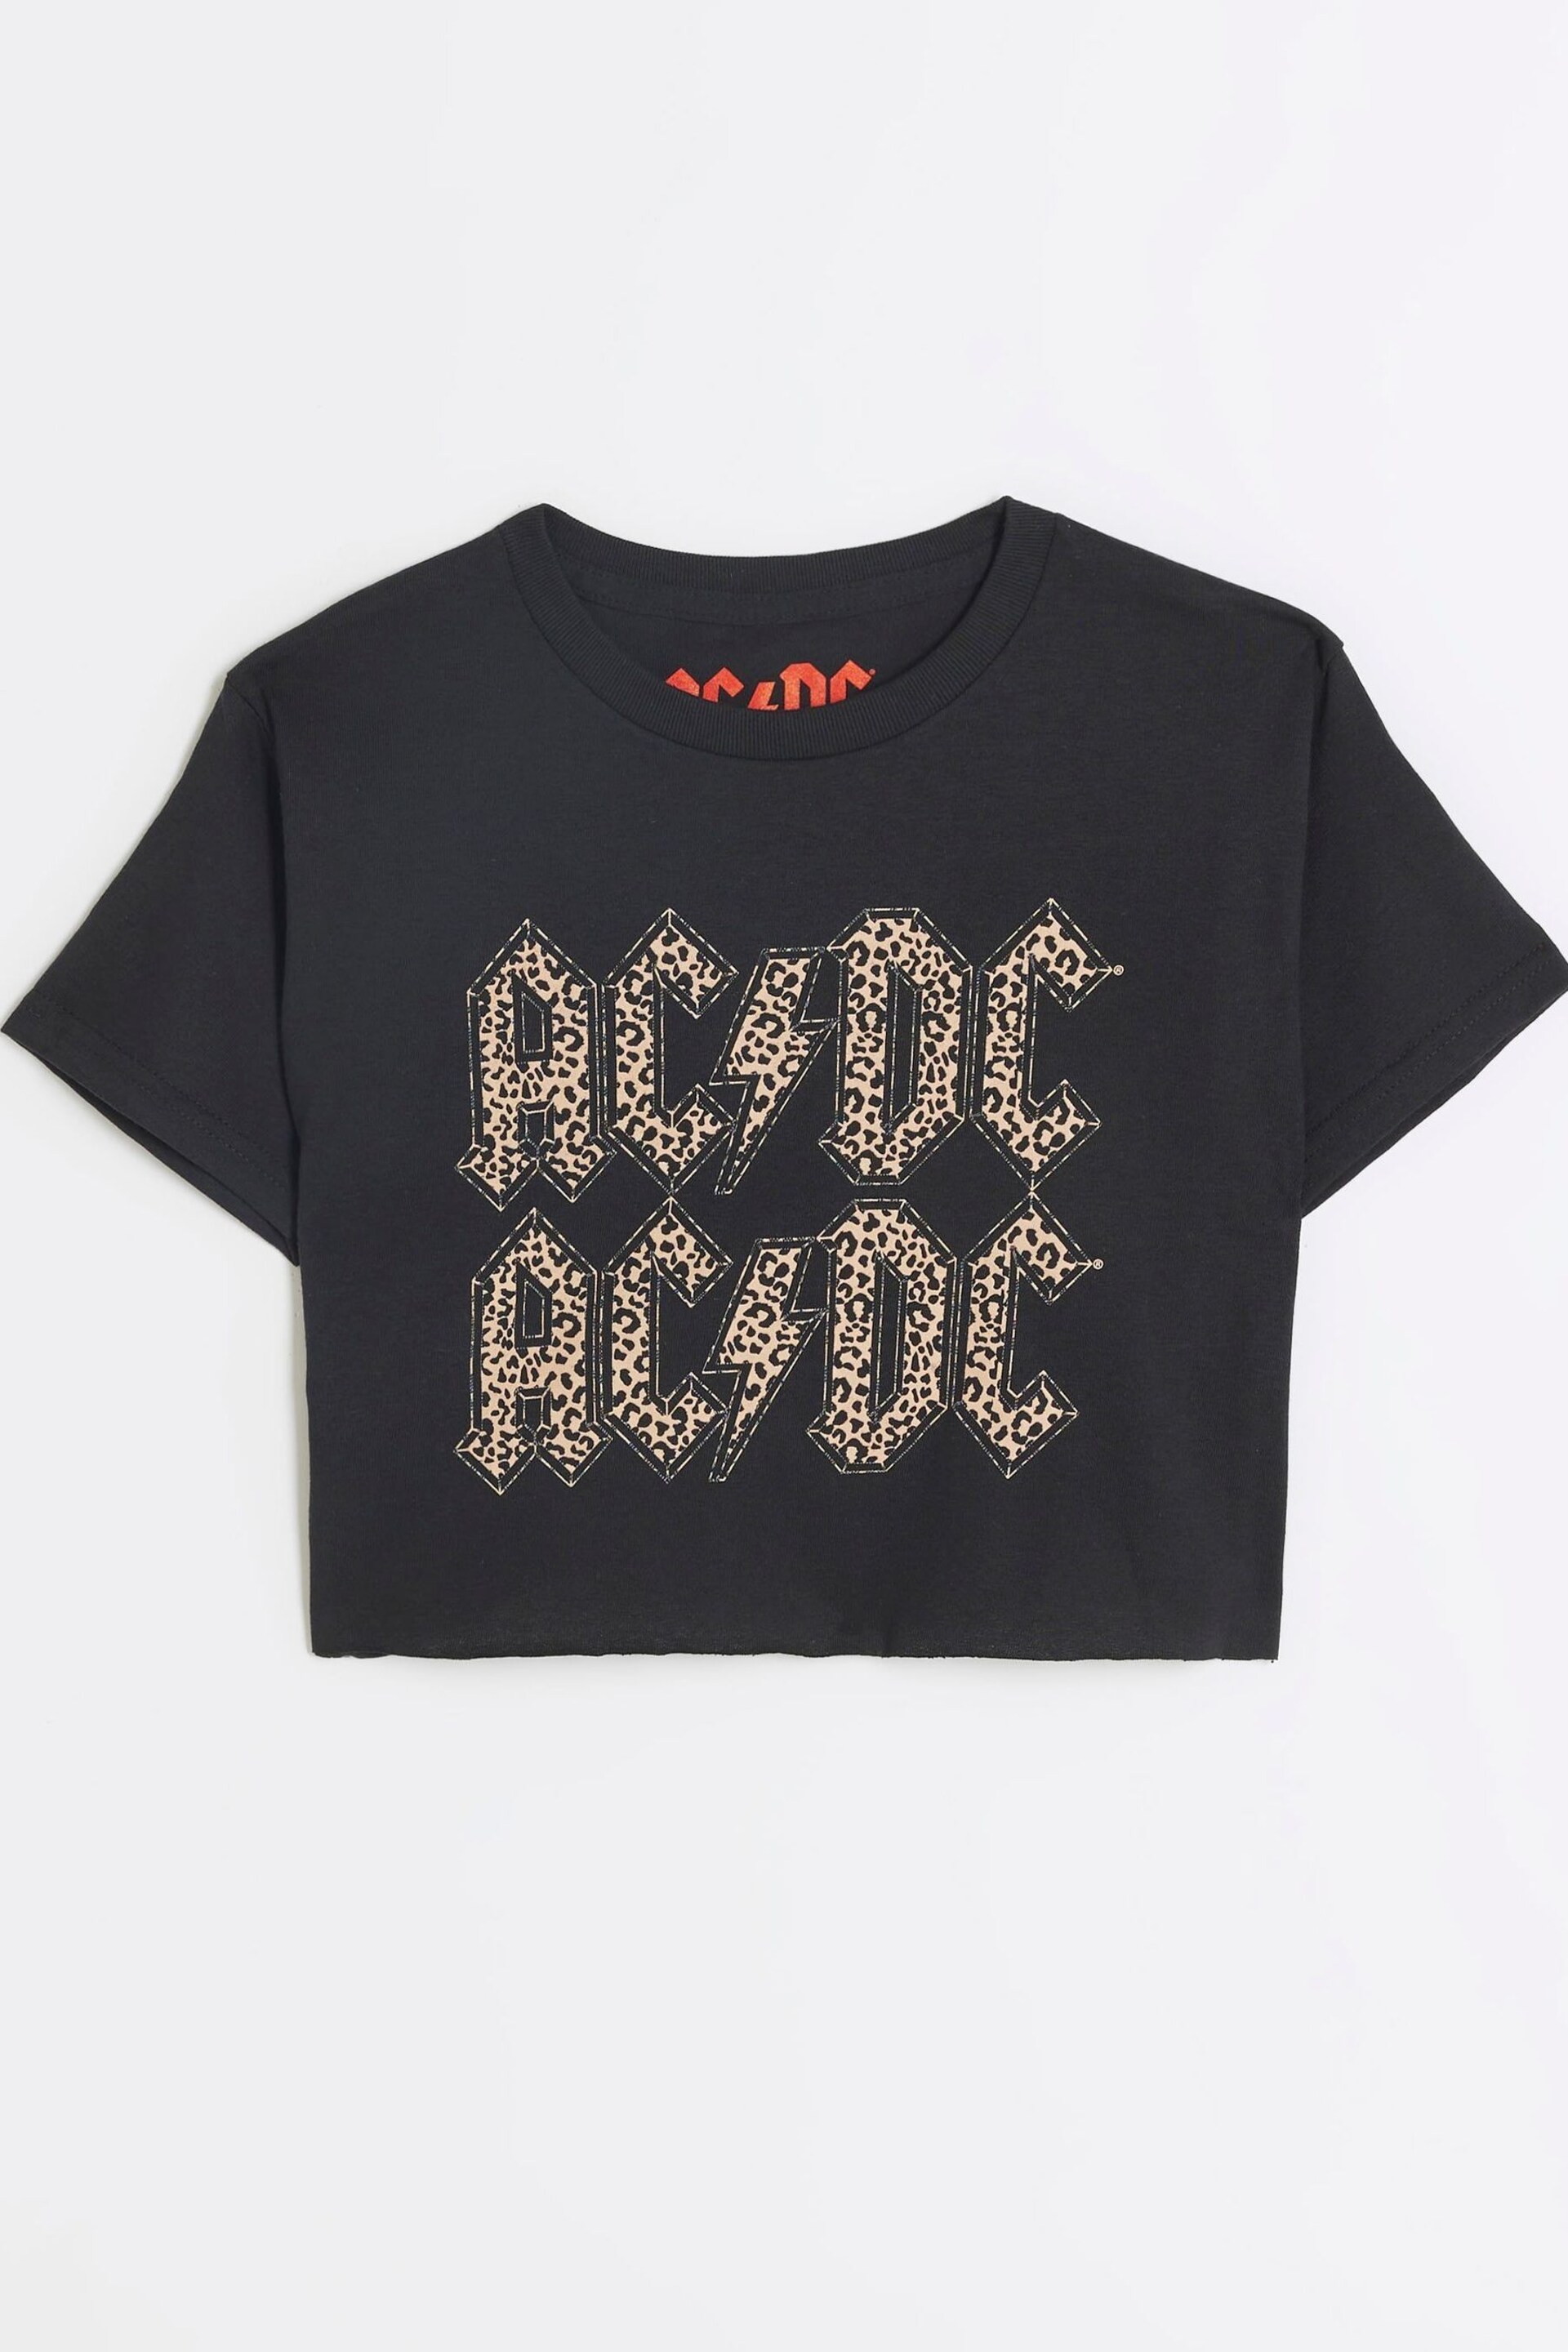 River Island Black ACDC License Band T-Shirt - Image 1 of 3